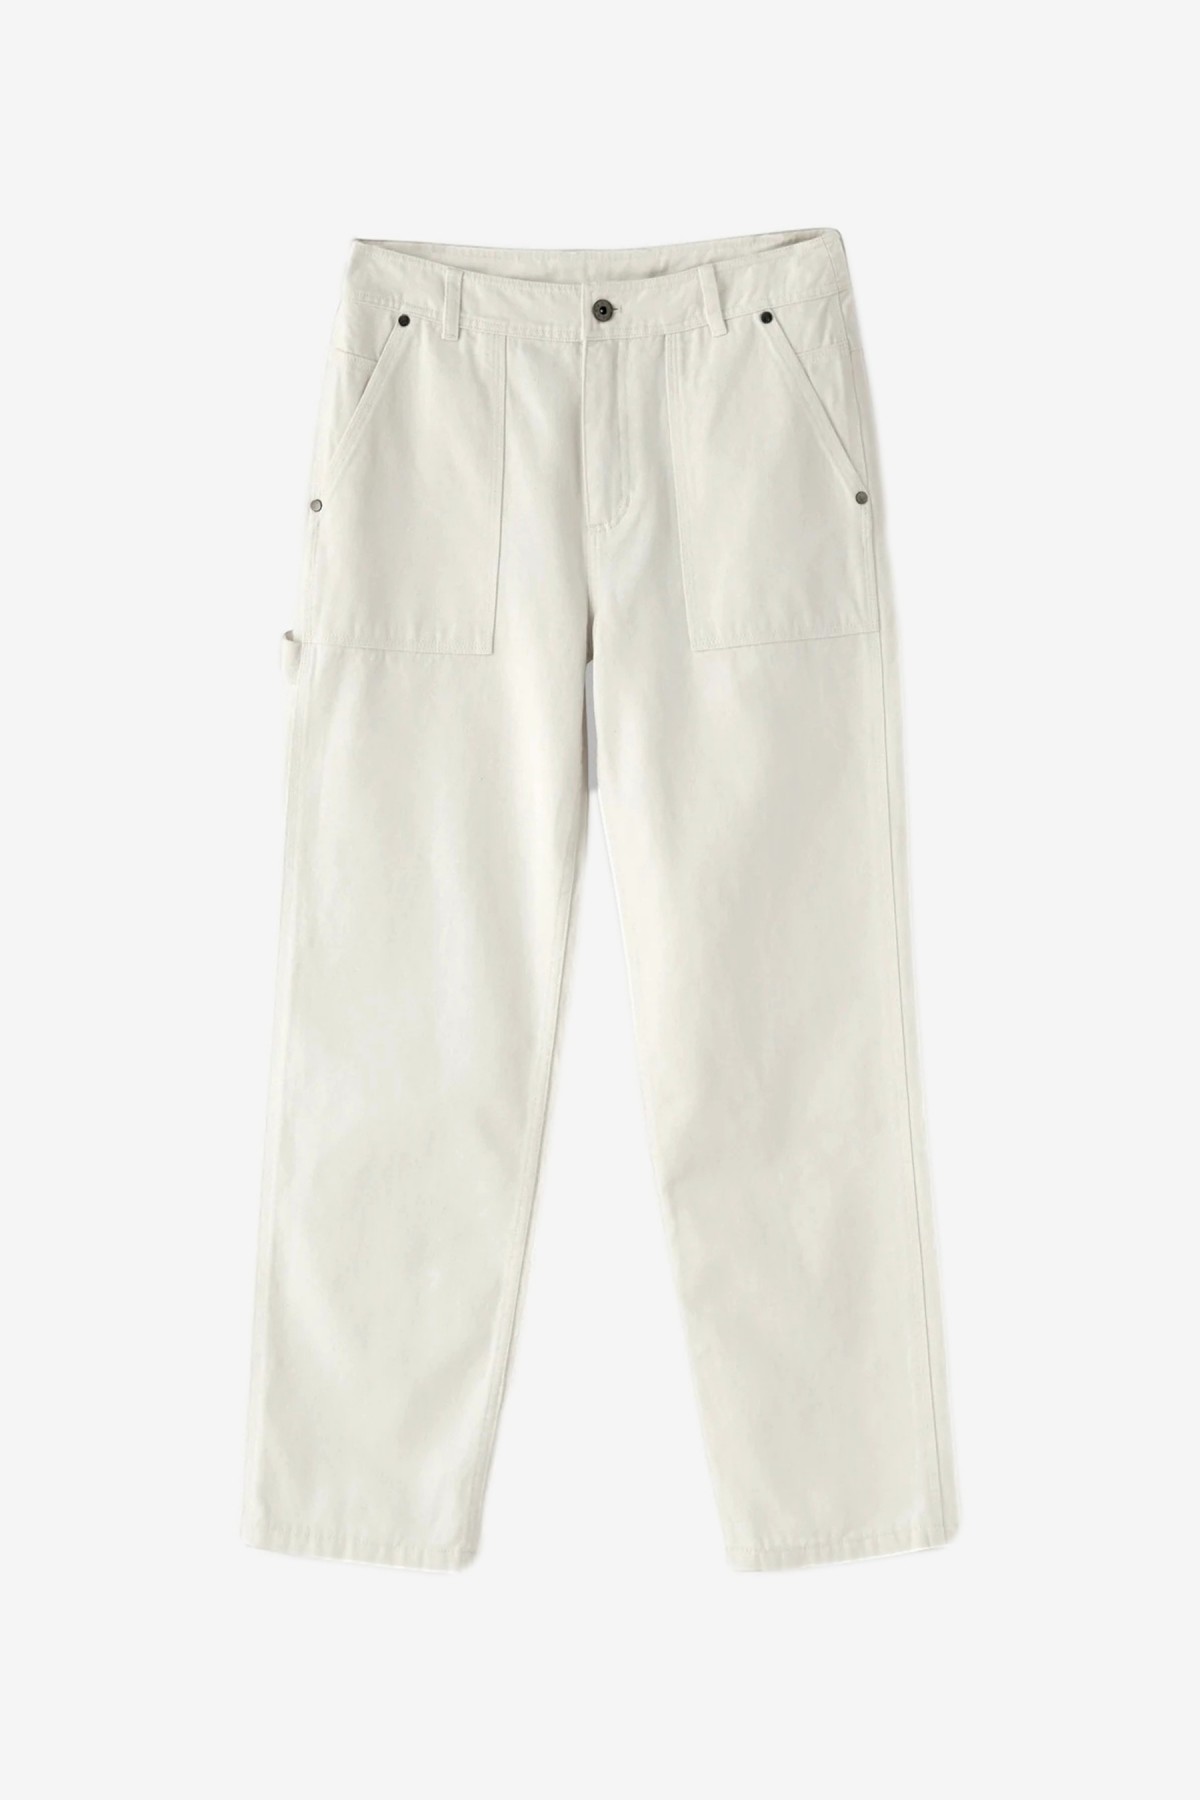 H2OFagerholt Love In Amsterdam Pants in Off White